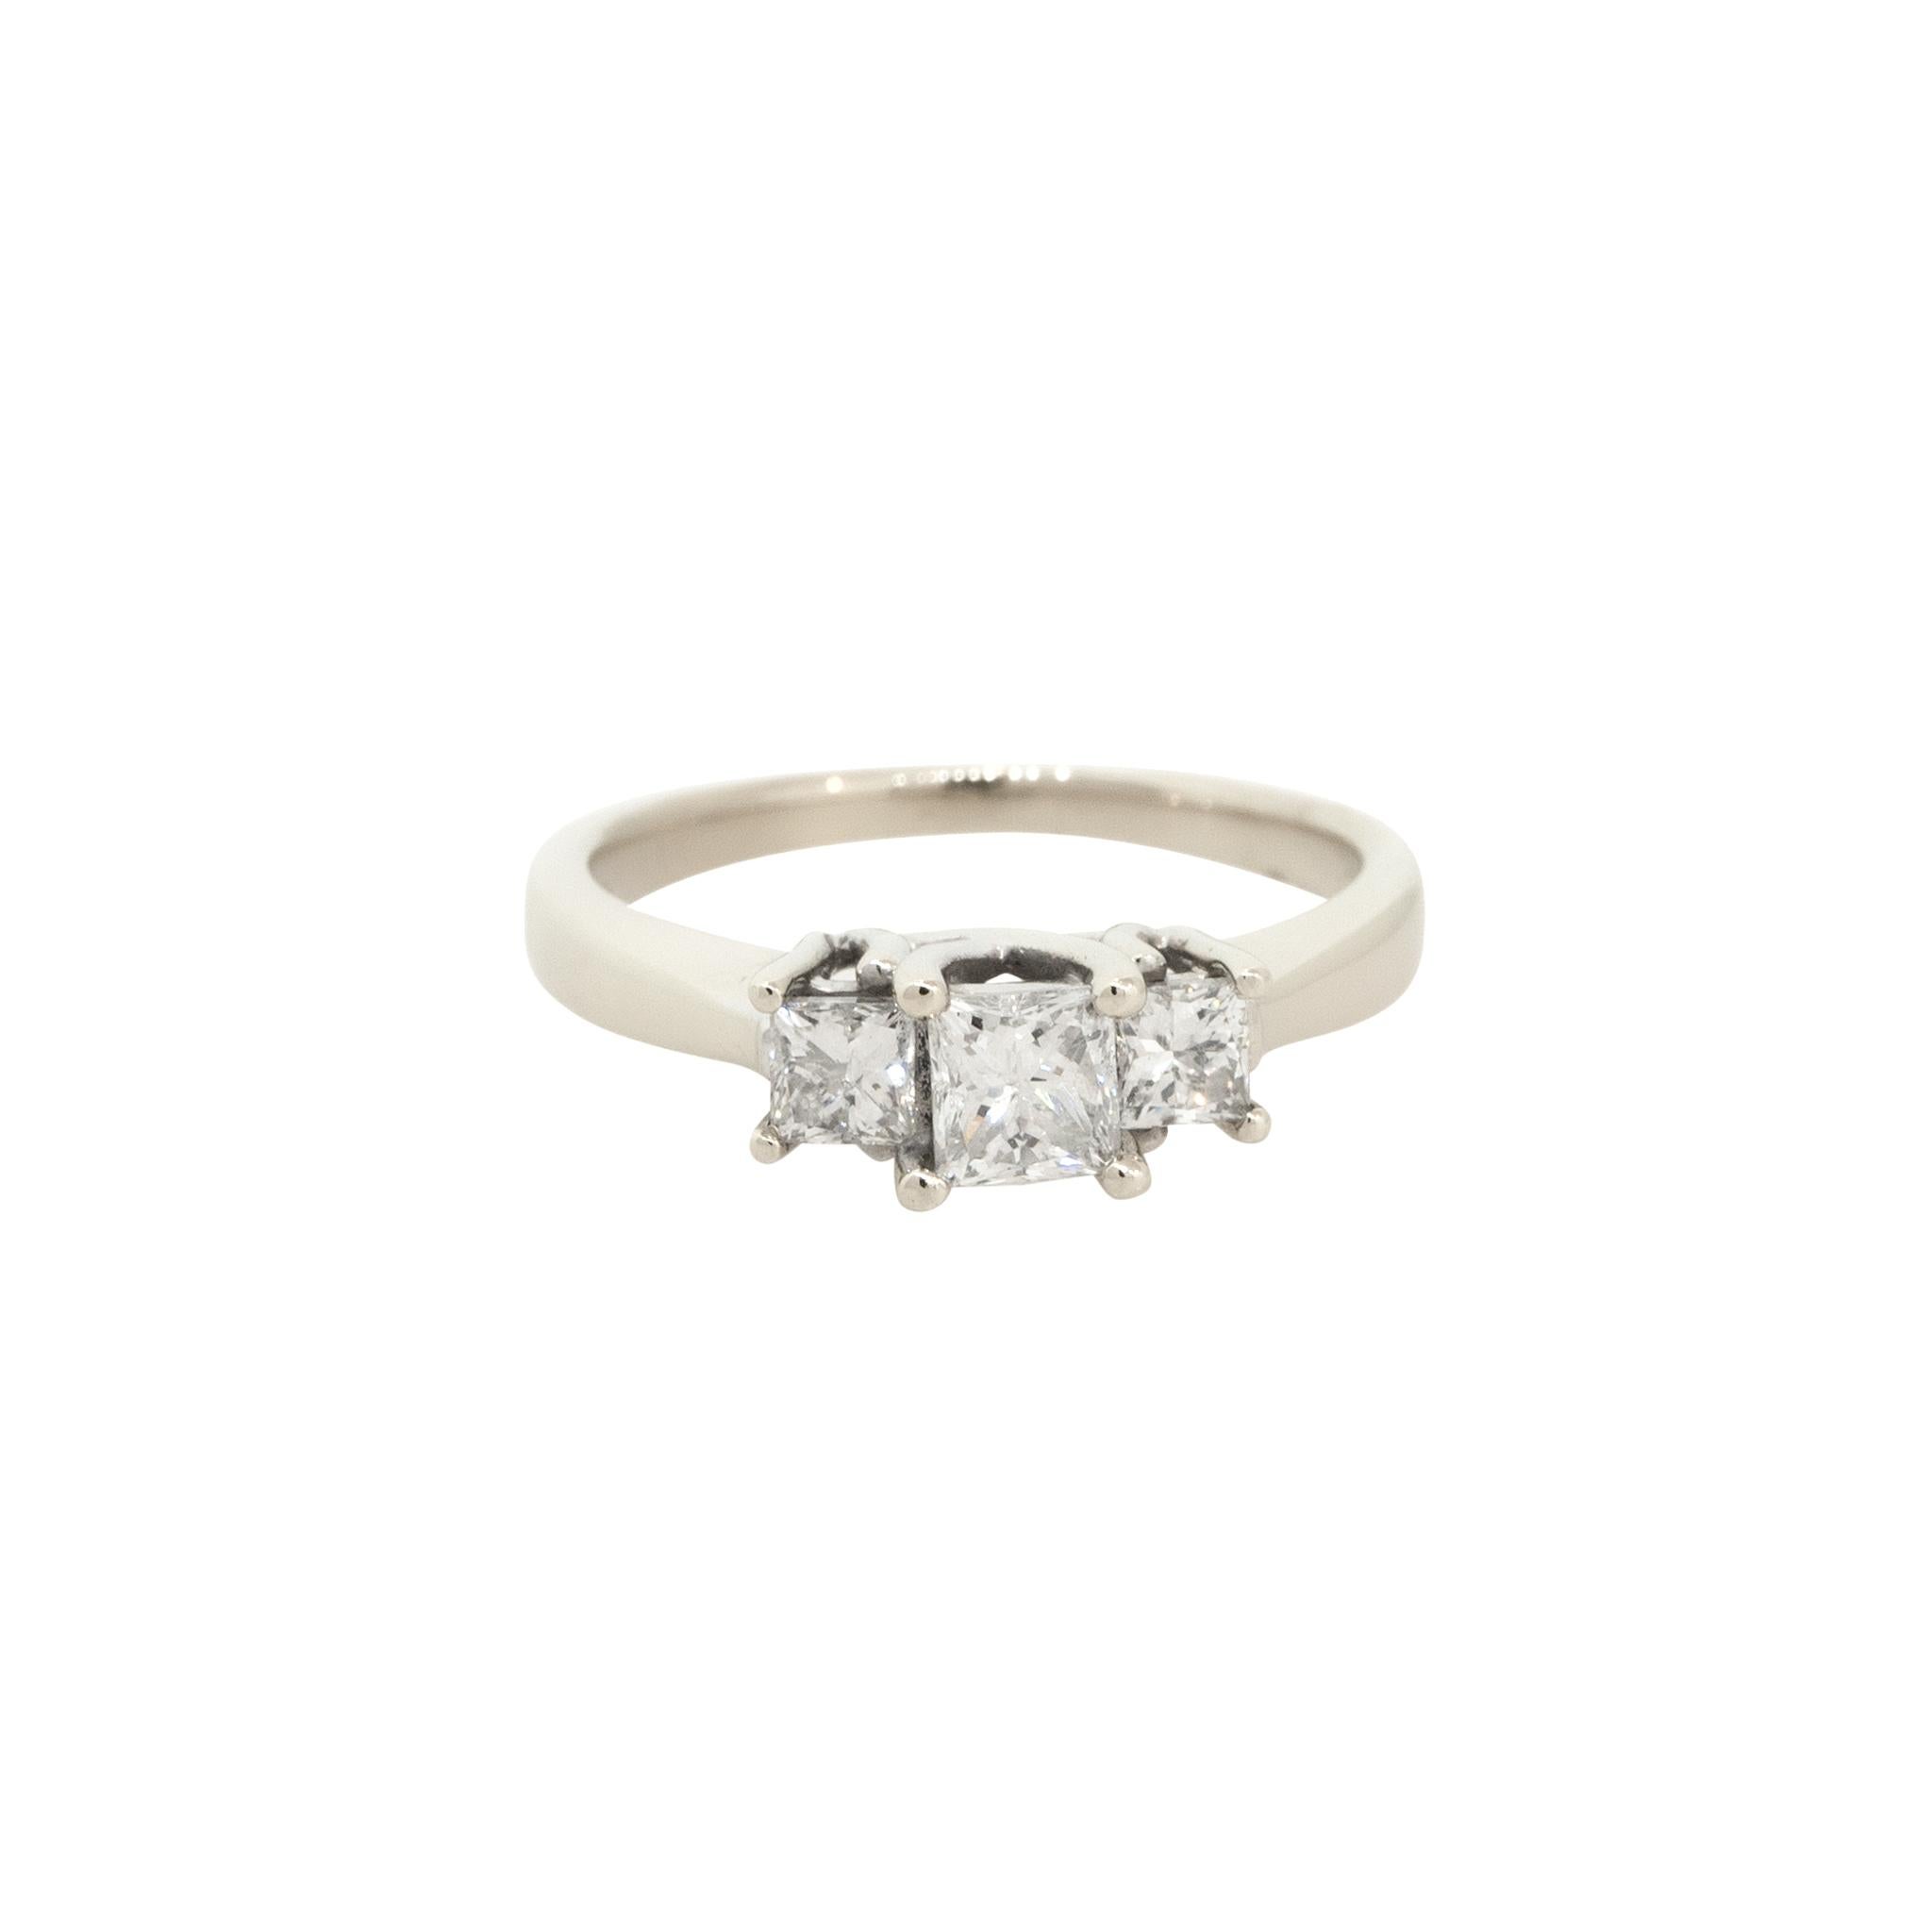 18k White Gold 1.0ctw Diamond 3 Stone Engagement Ring

Material: 18k White Gold
Diamond Details: Approx. 1.0ctw Princess Cut Diamonds. Diamonds are J in color and SI2 in clarity
Size: 7
Total Weight: 4.1g (2.6dwt)
Measurements: 0.80